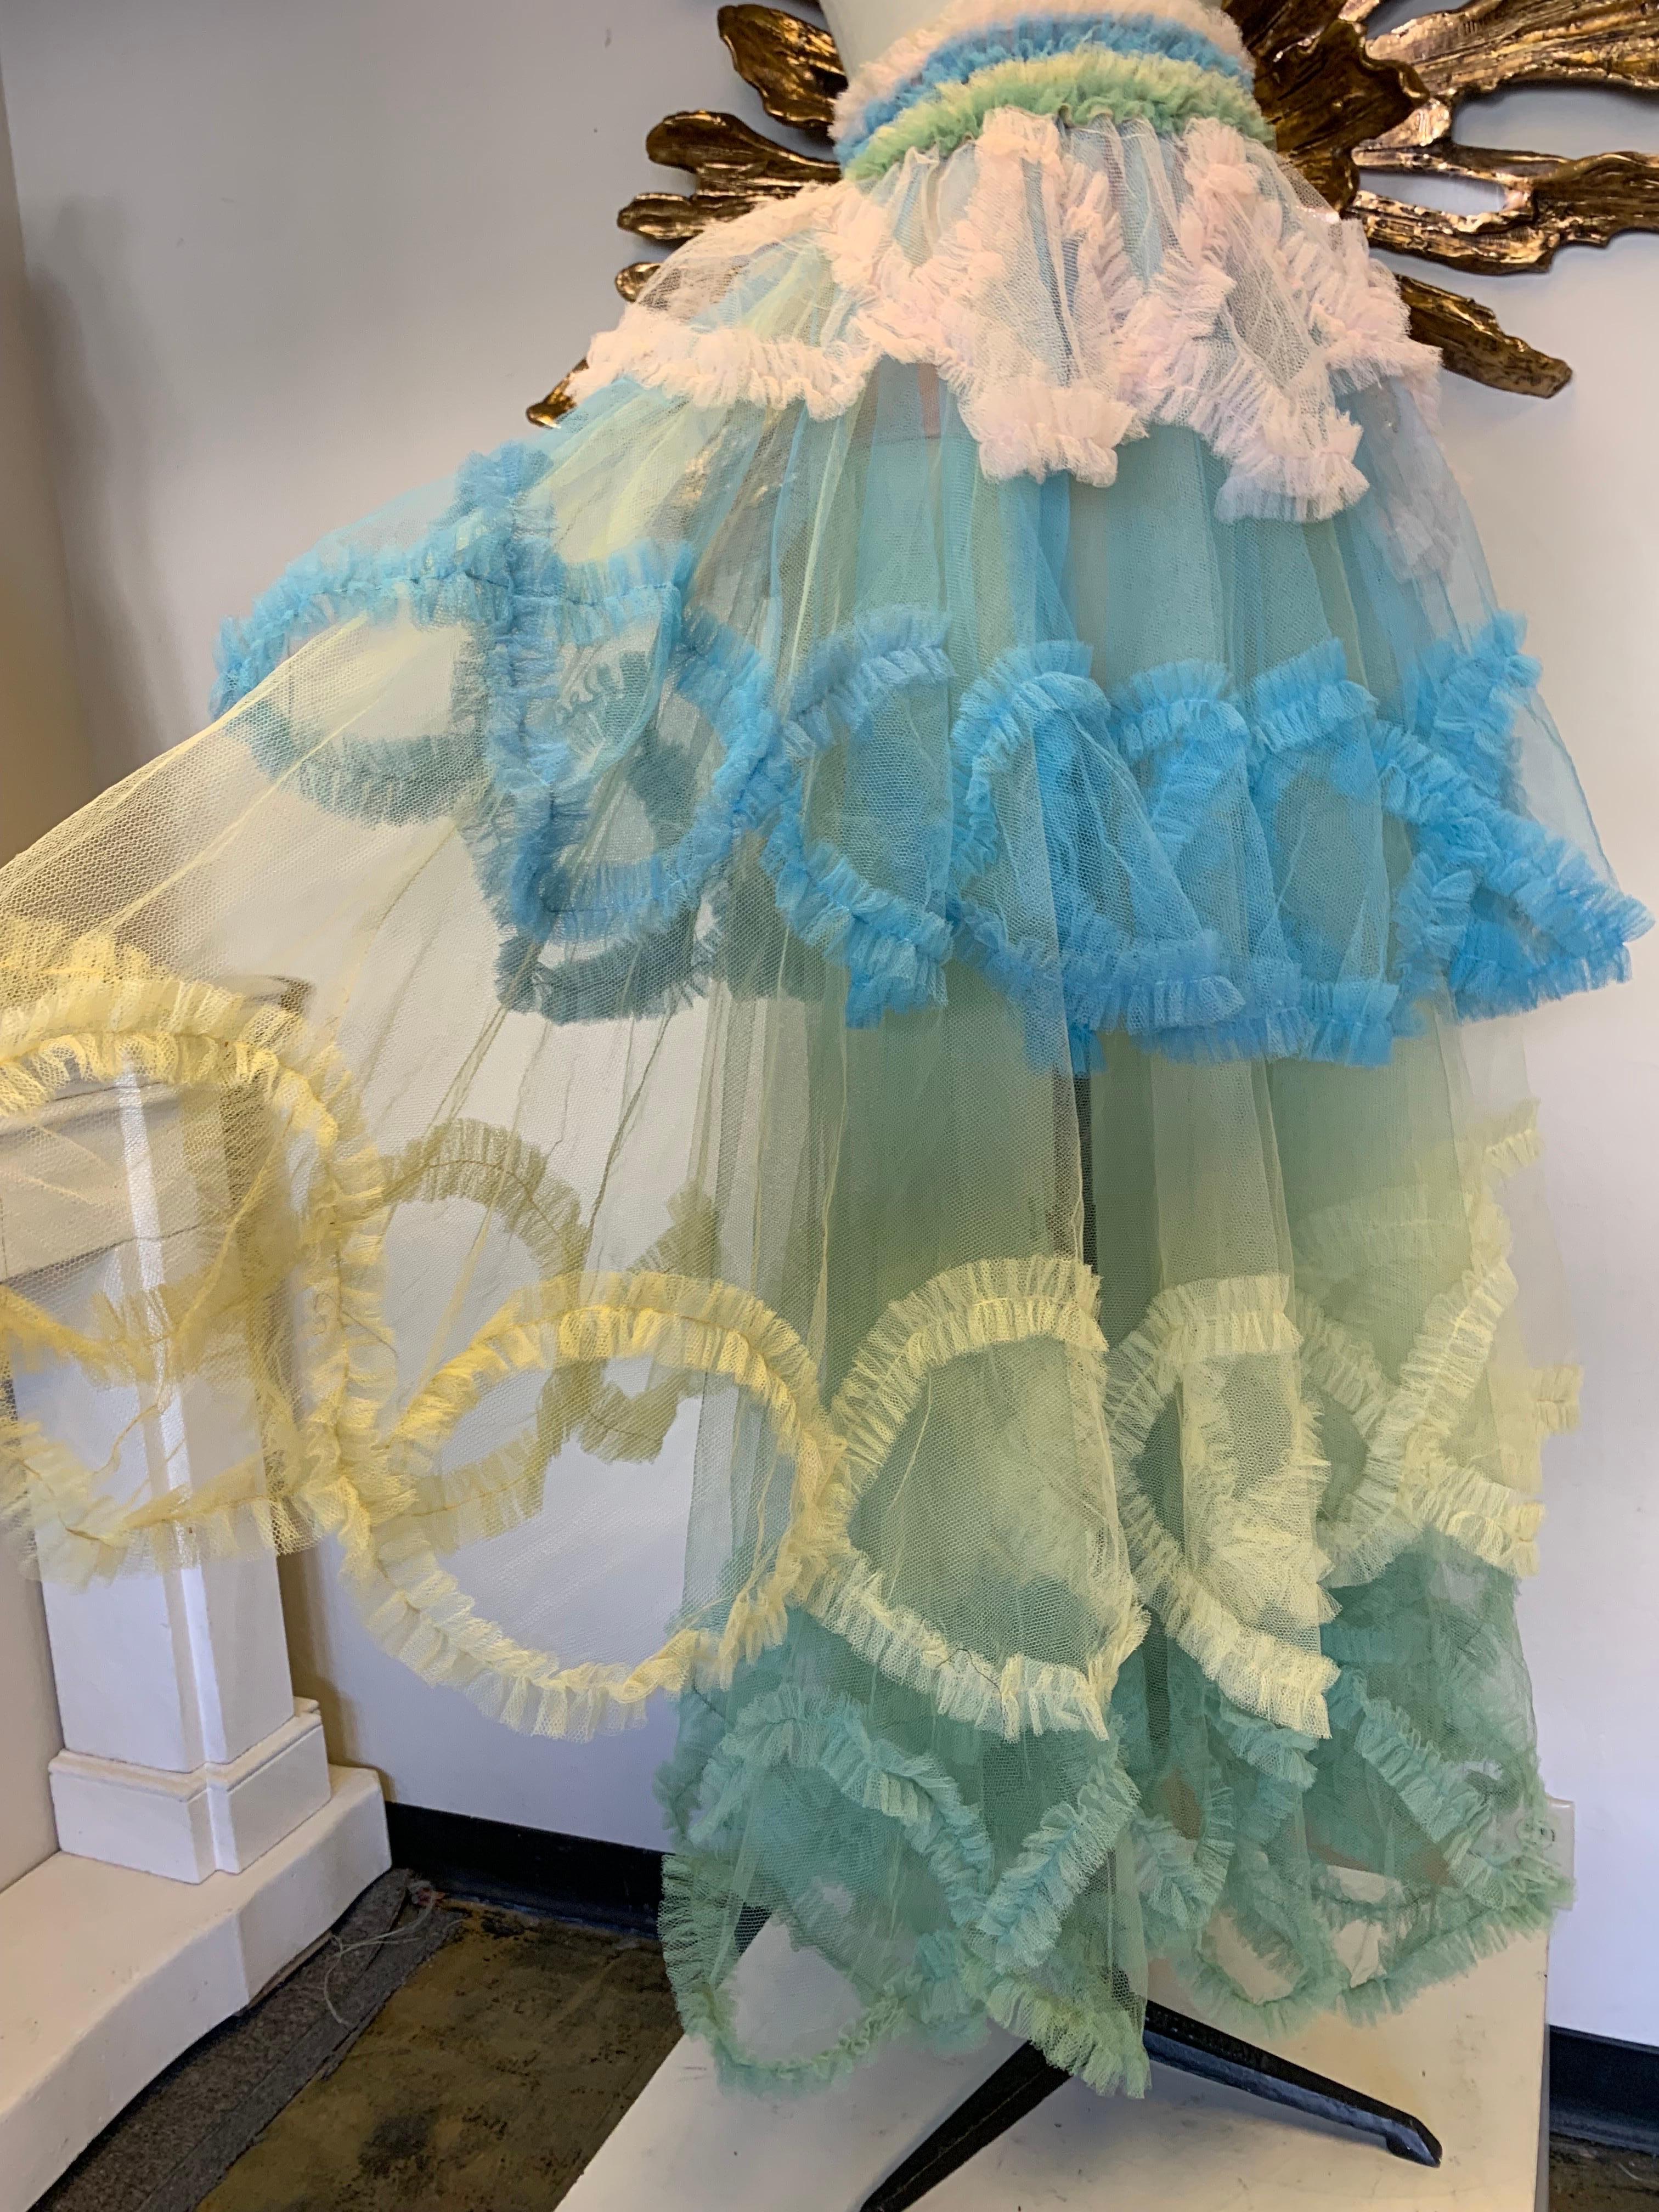 Torso Creations 1950s-Styled Tiered Tulle Ball Skirt w Colorful Ruffles  For Sale 6